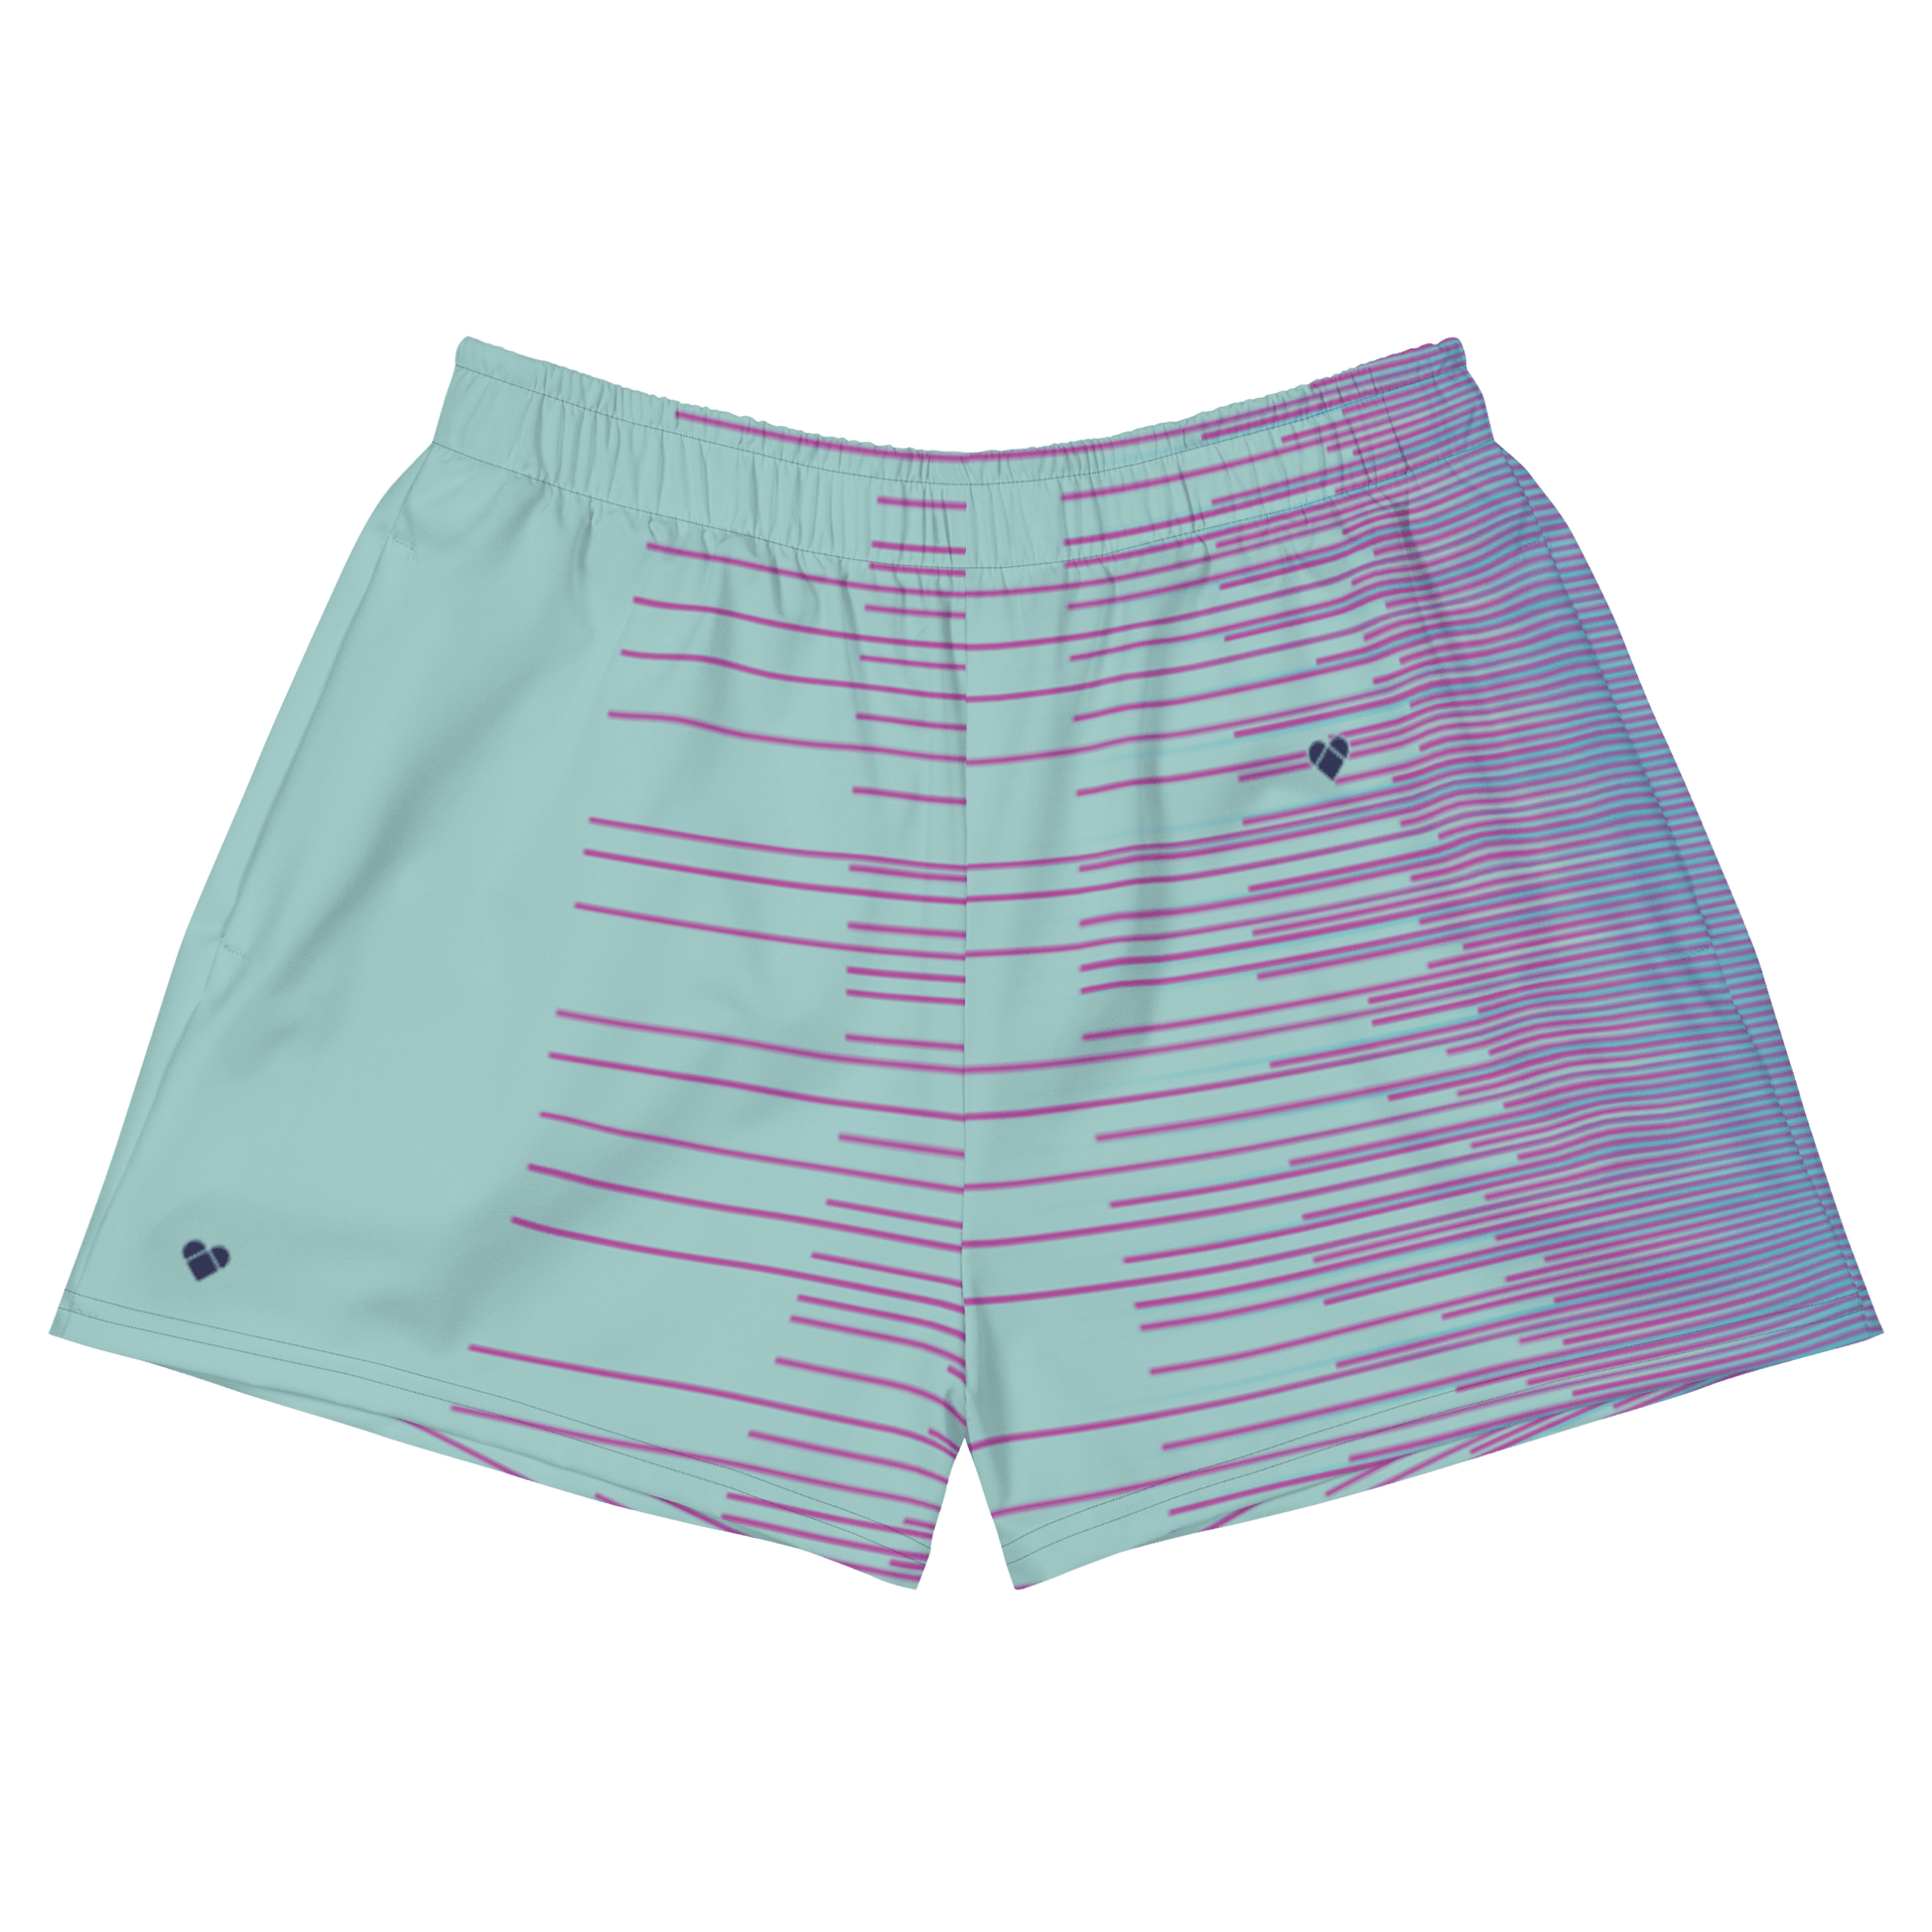 Mint Stripes Dual Sport Shorts for Women by CRiZ AMOR - Front View